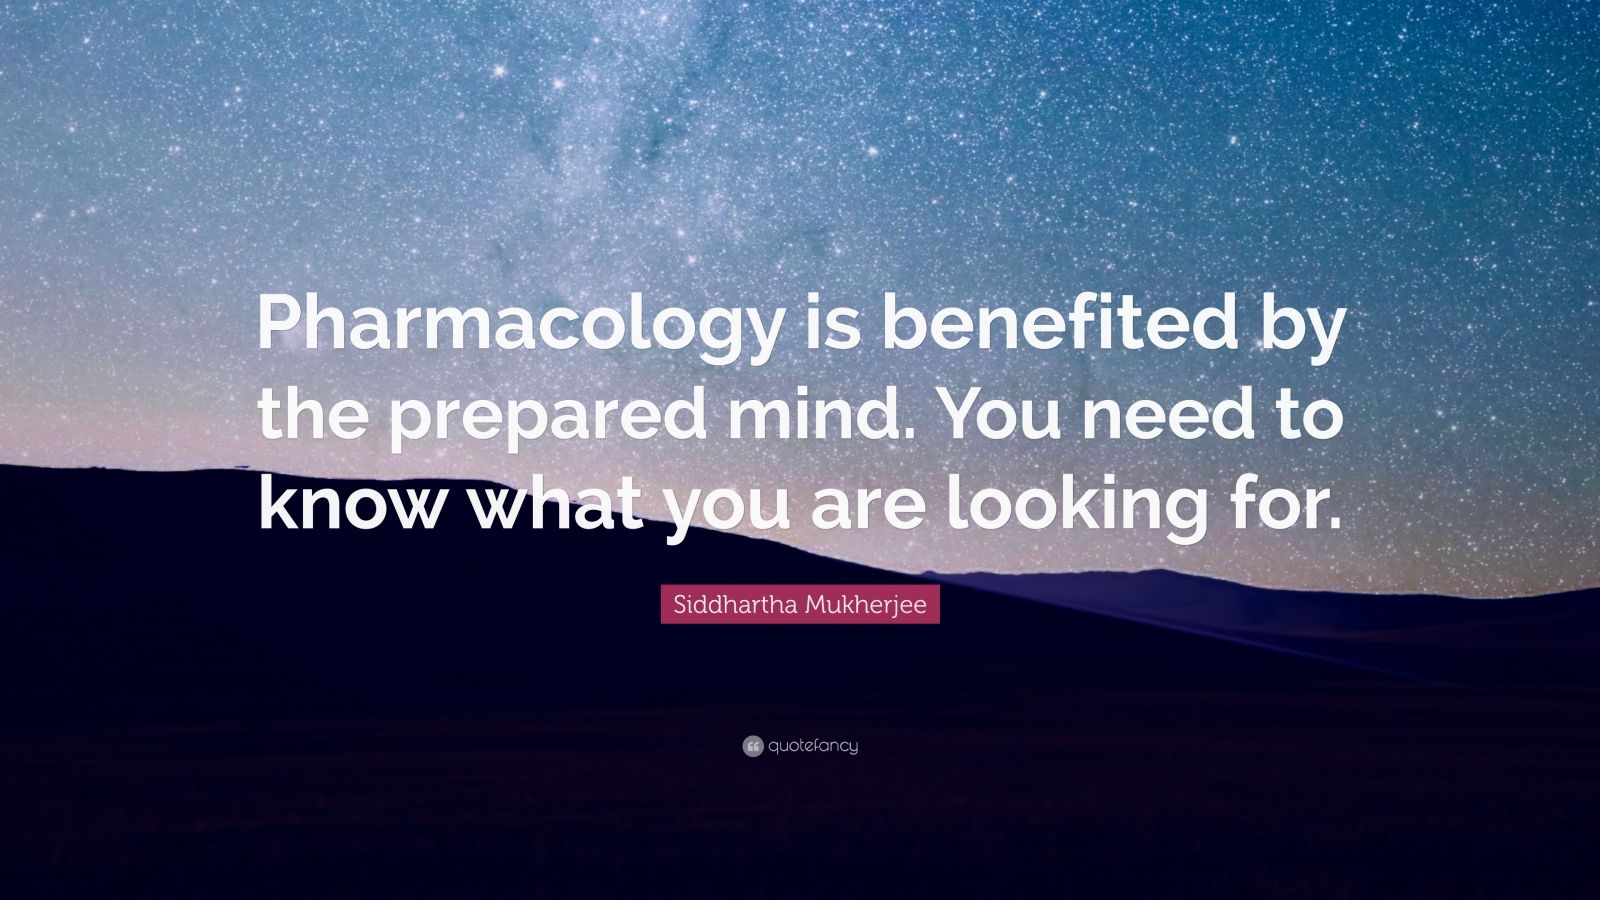 Siddhartha Mukherjee Quote: “Pharmacology is benefited by the prepared mind. You need to know what you are looking for.” (7 wallpaper)